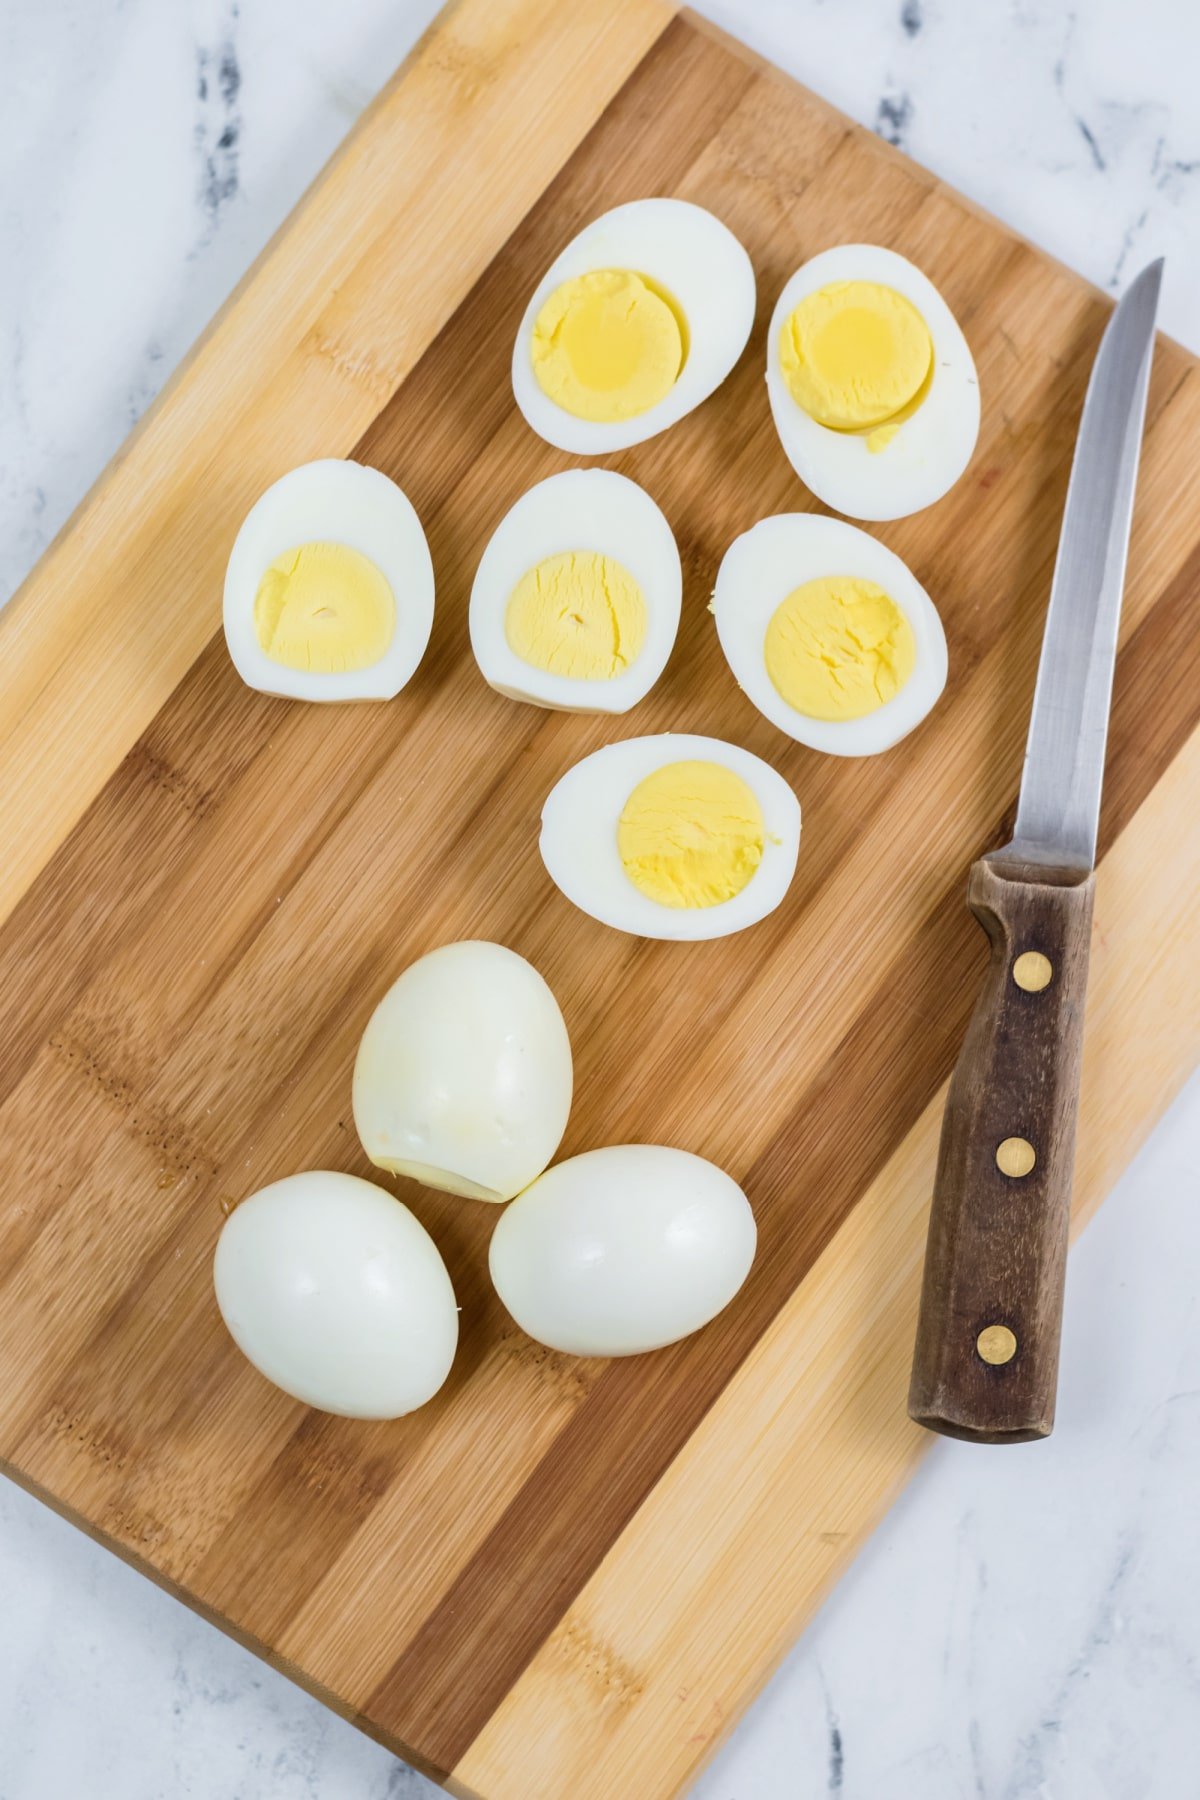 Boil and slice eggs